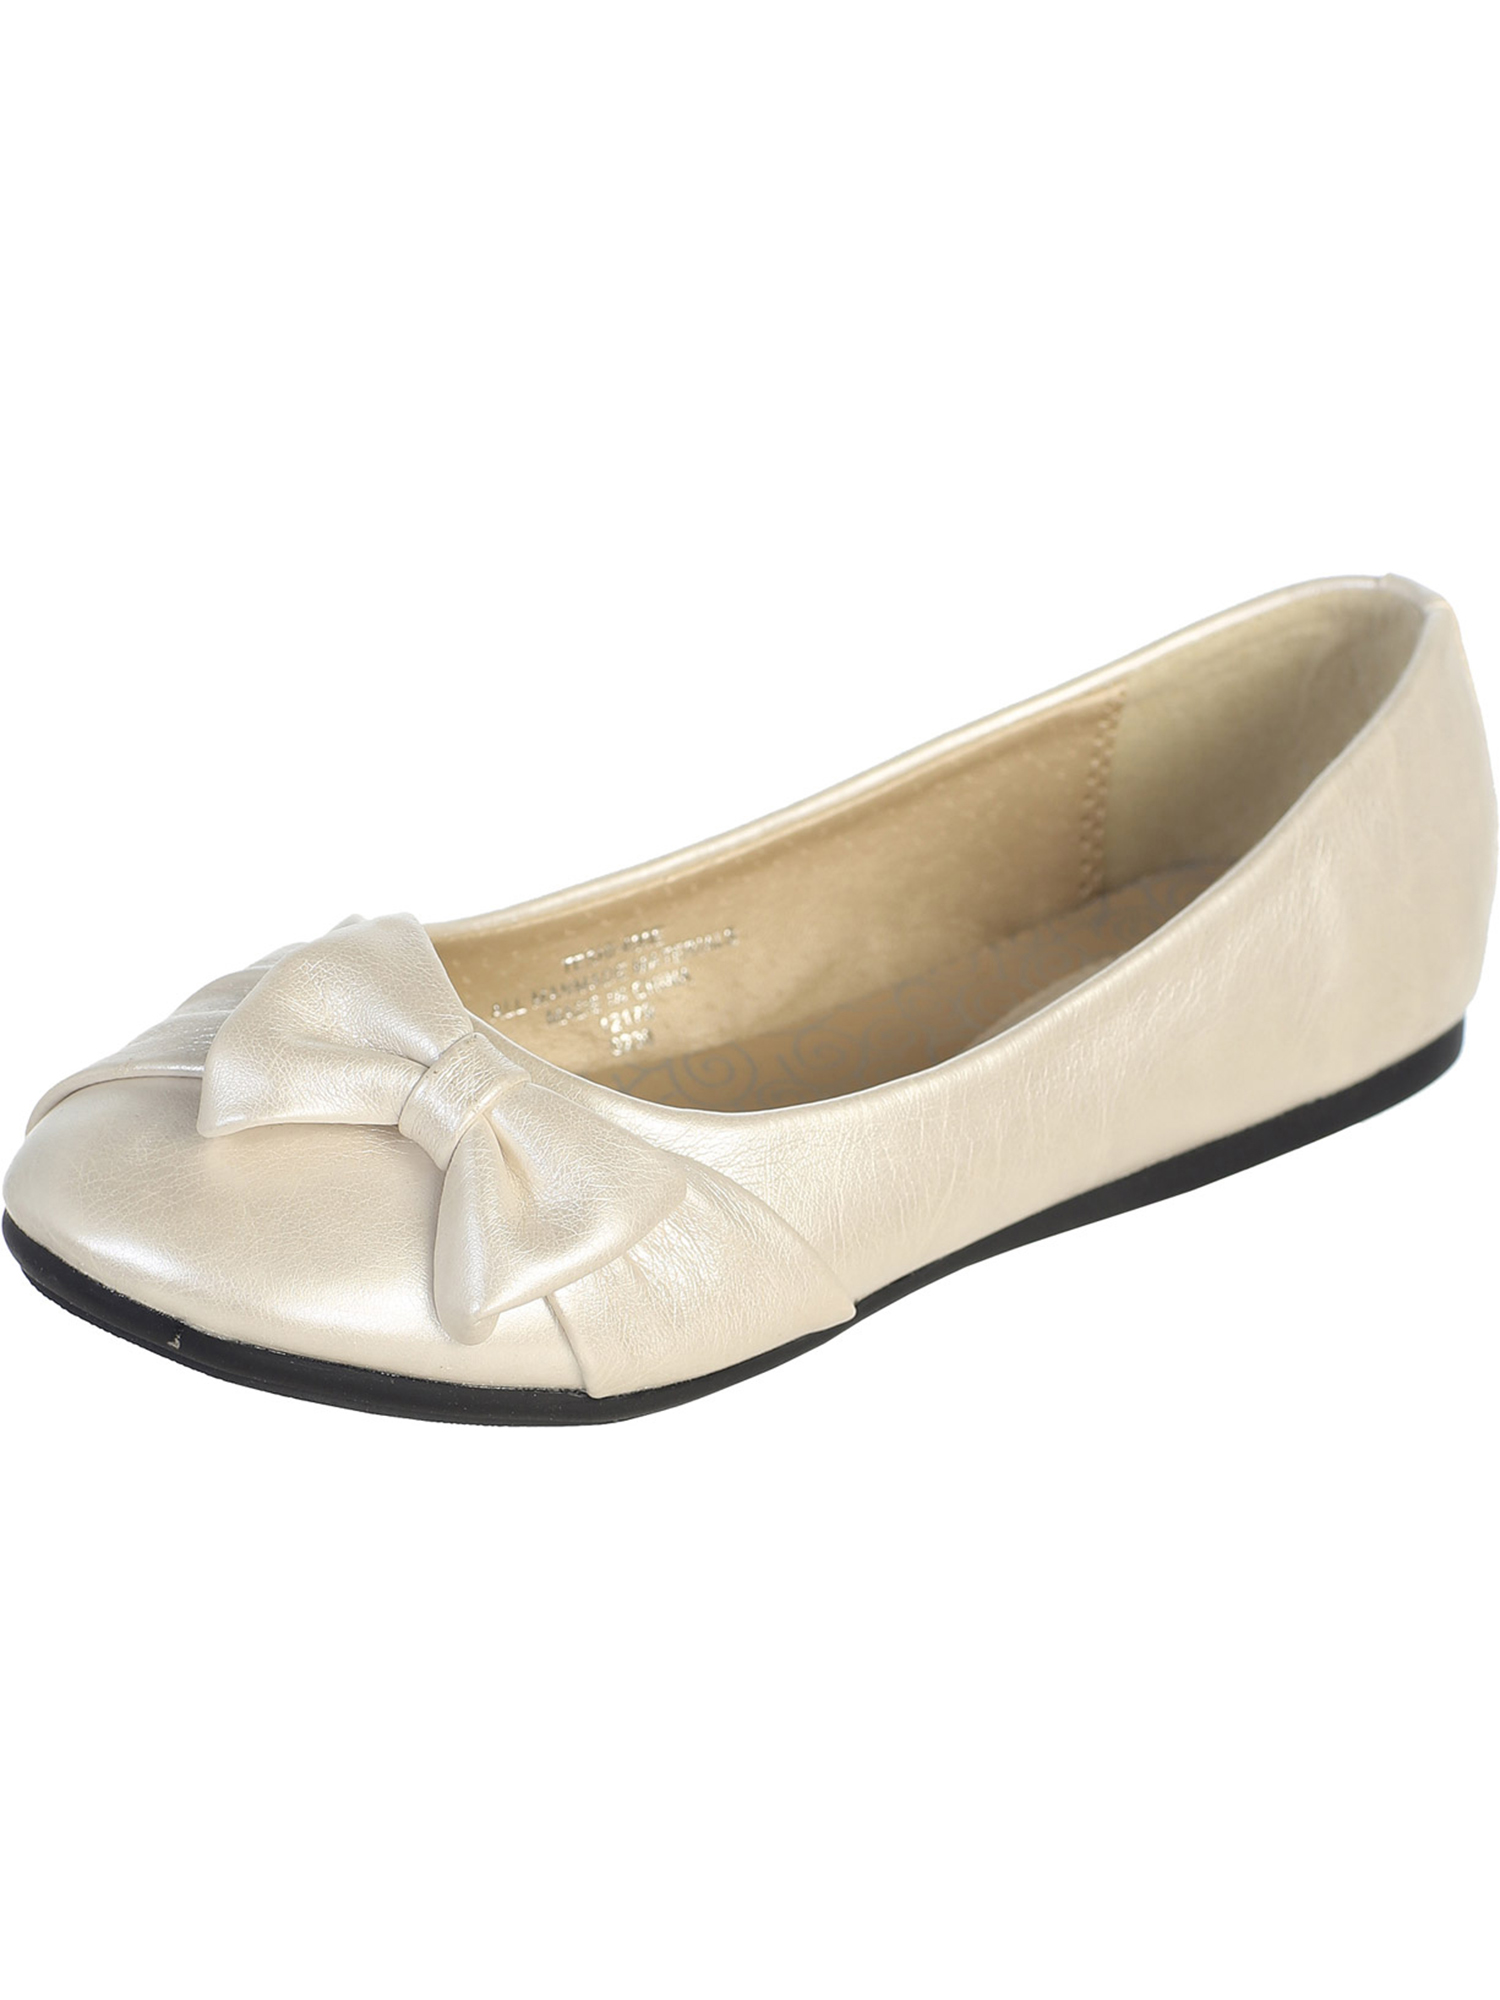 Ivory Pearl Girl's Flat Shoes with Side Bow Infant 5